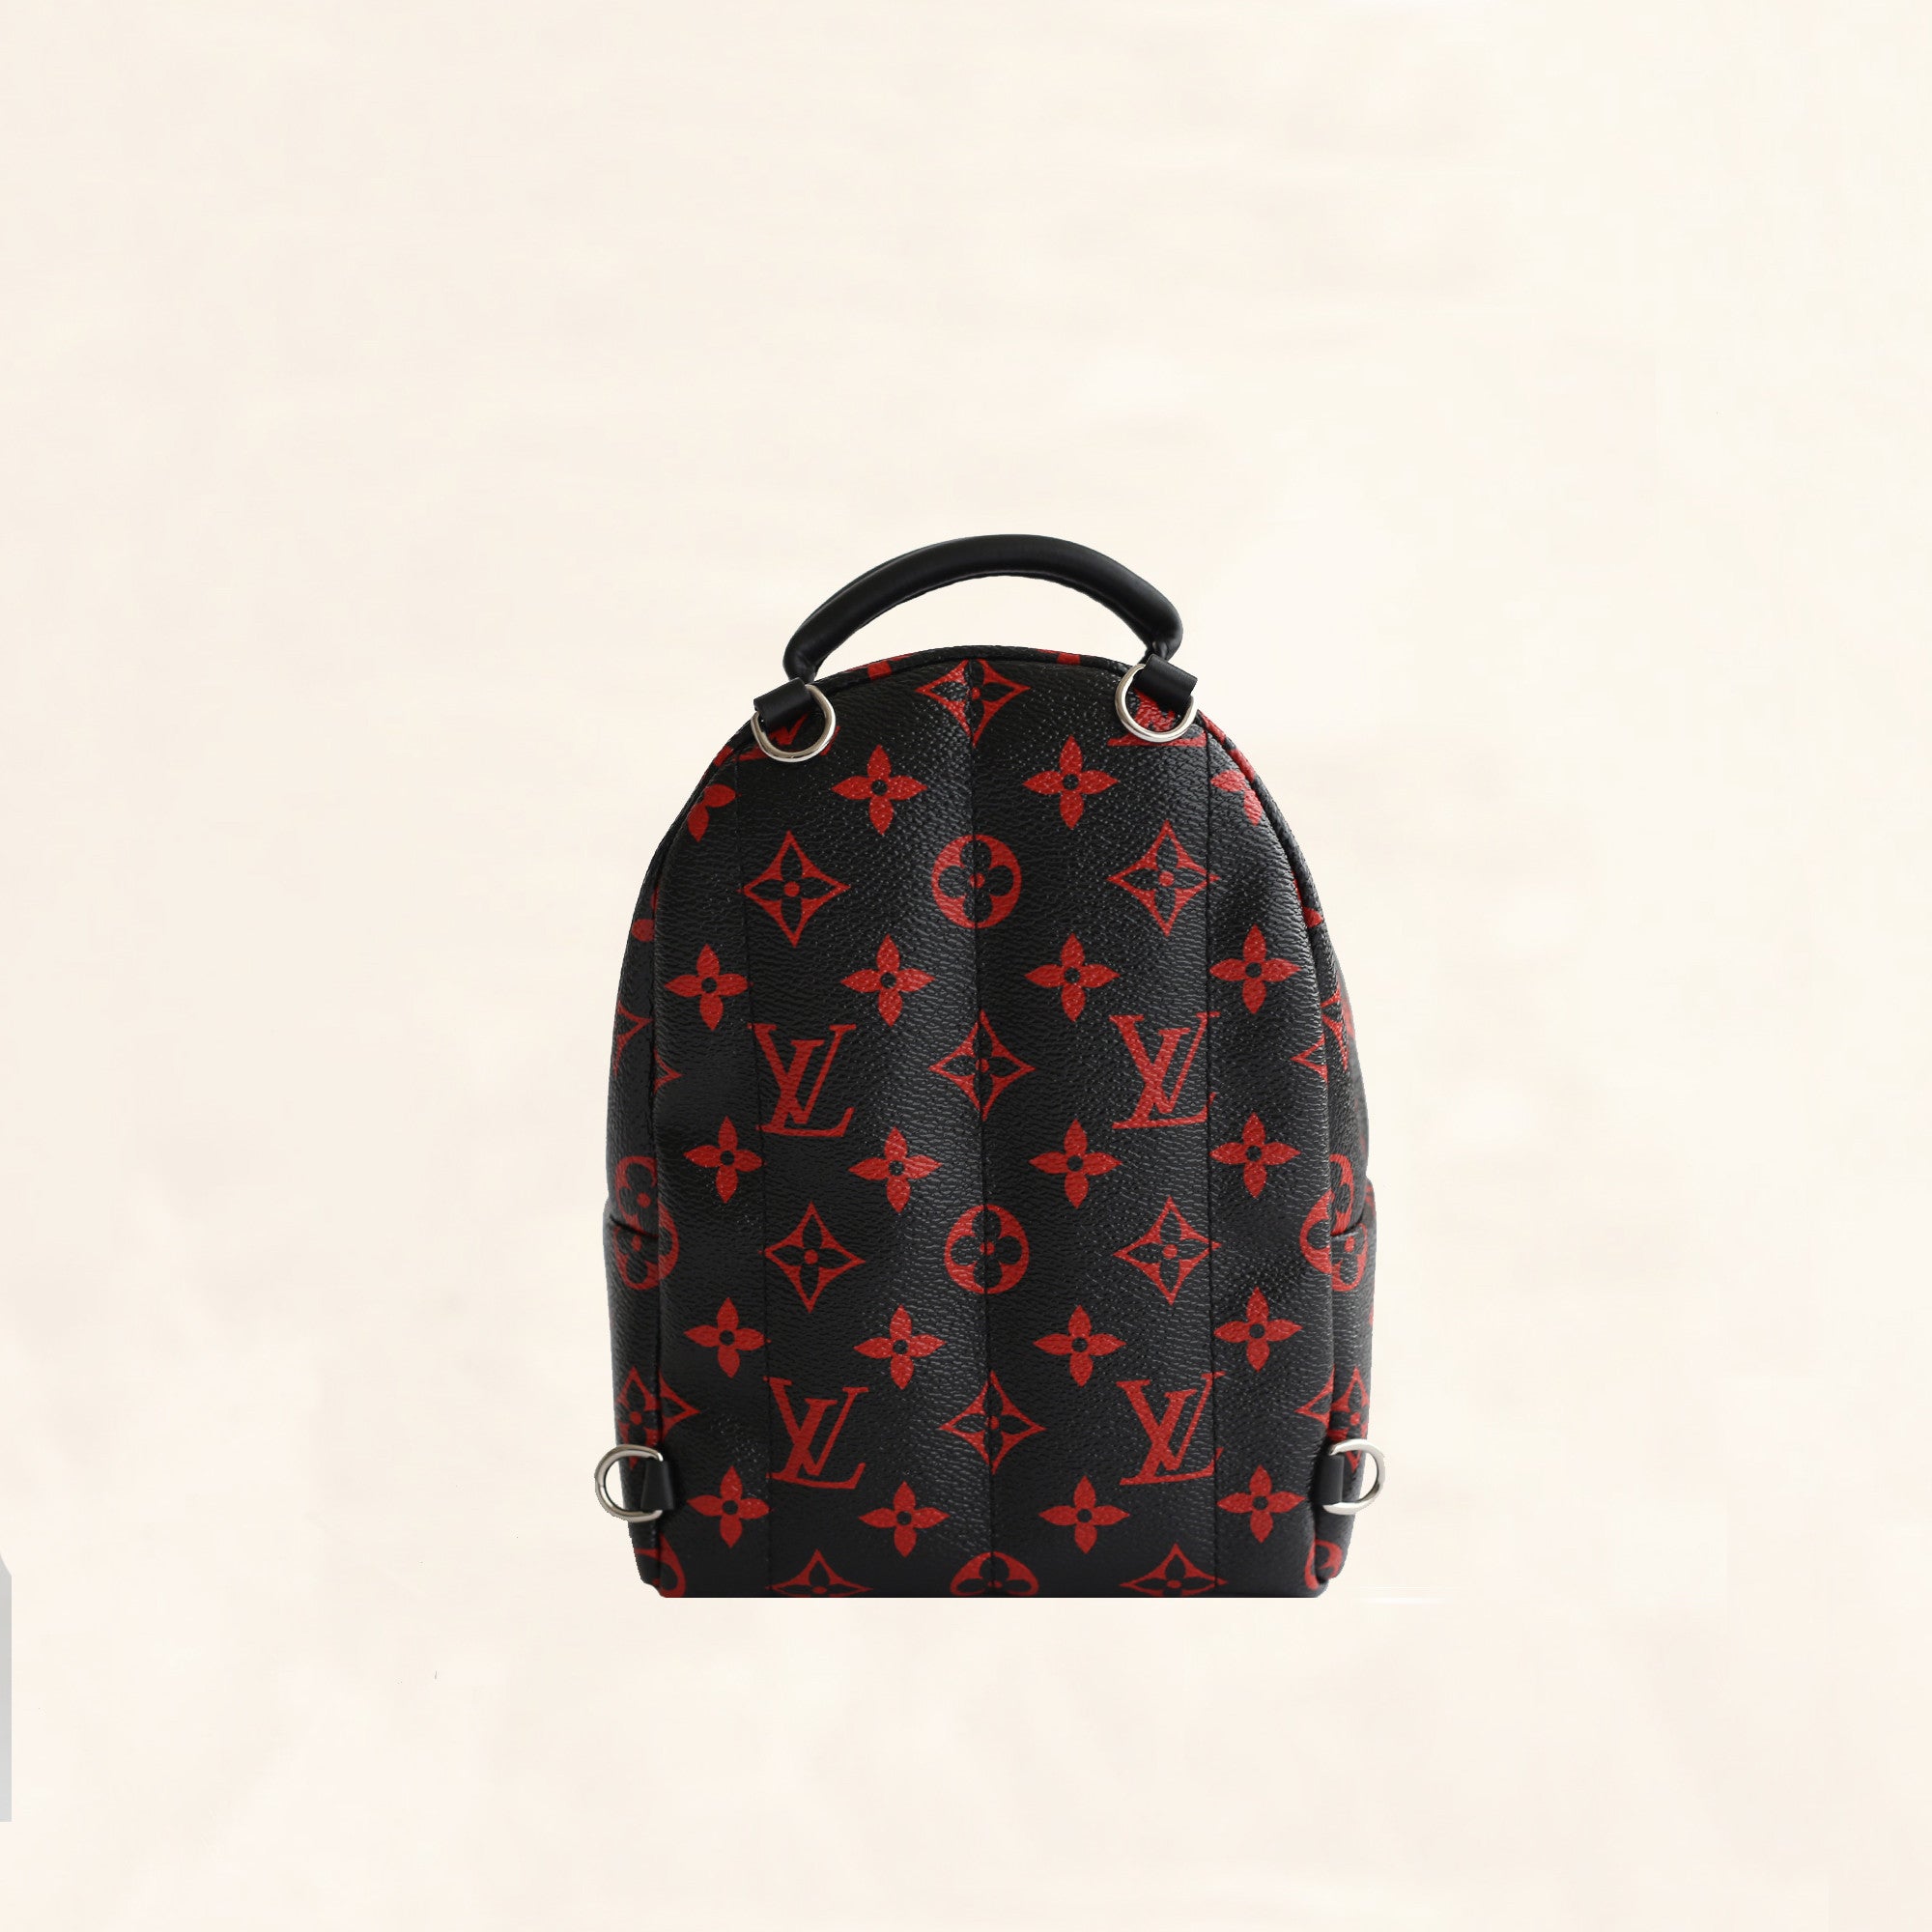 Lv Backpack Black And Red | SEMA Data Co-op